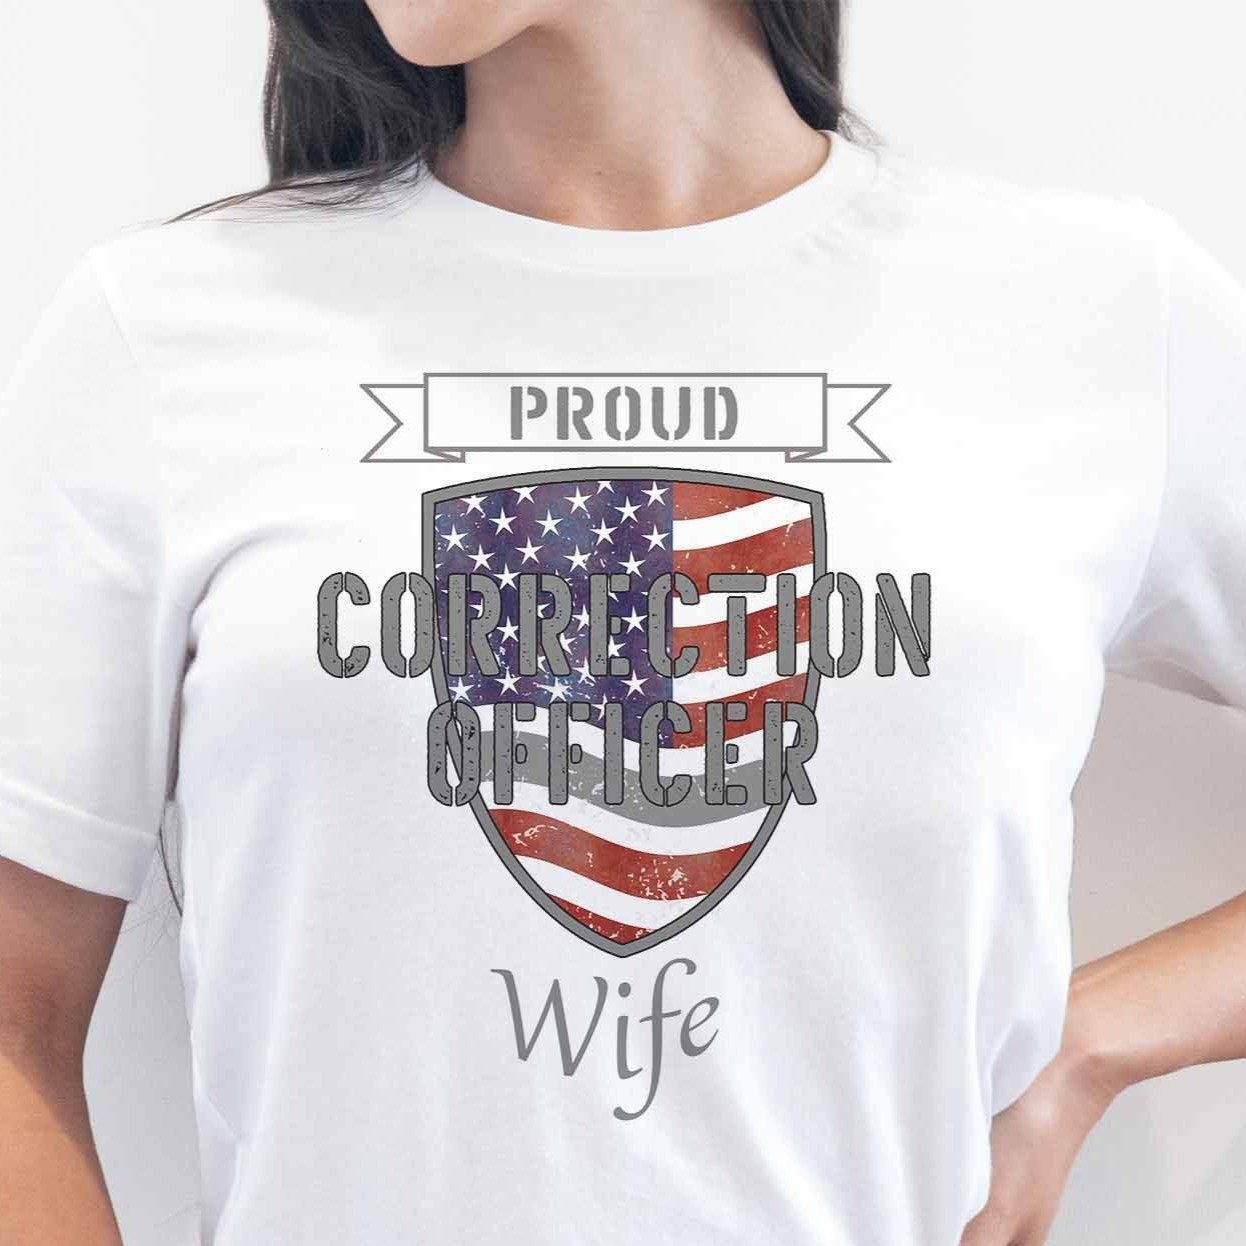 Proud Correction Officer Wife - My Custom Tee Party